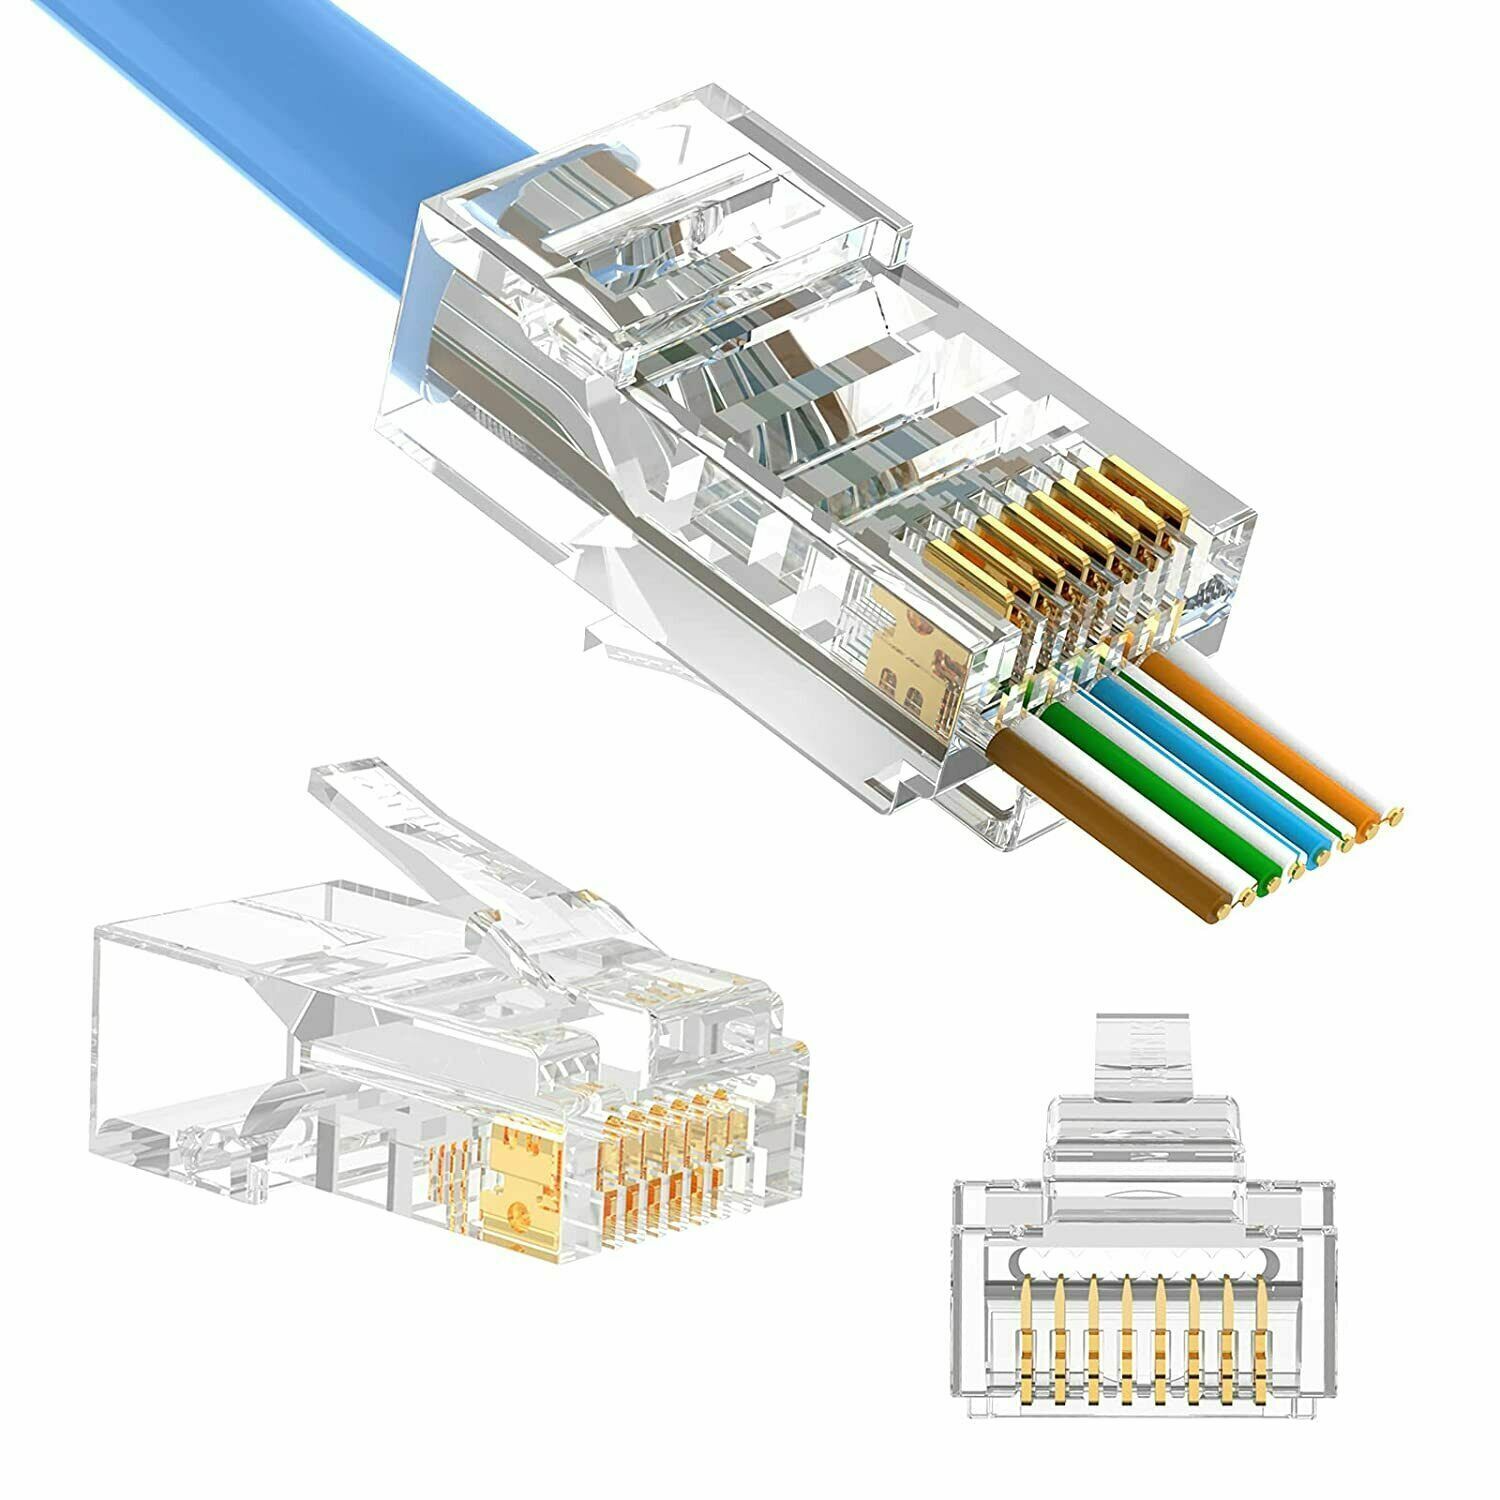 200Pc RJ45 Pass Through Modular Plug Network Cable Connector End - Click Image to Close